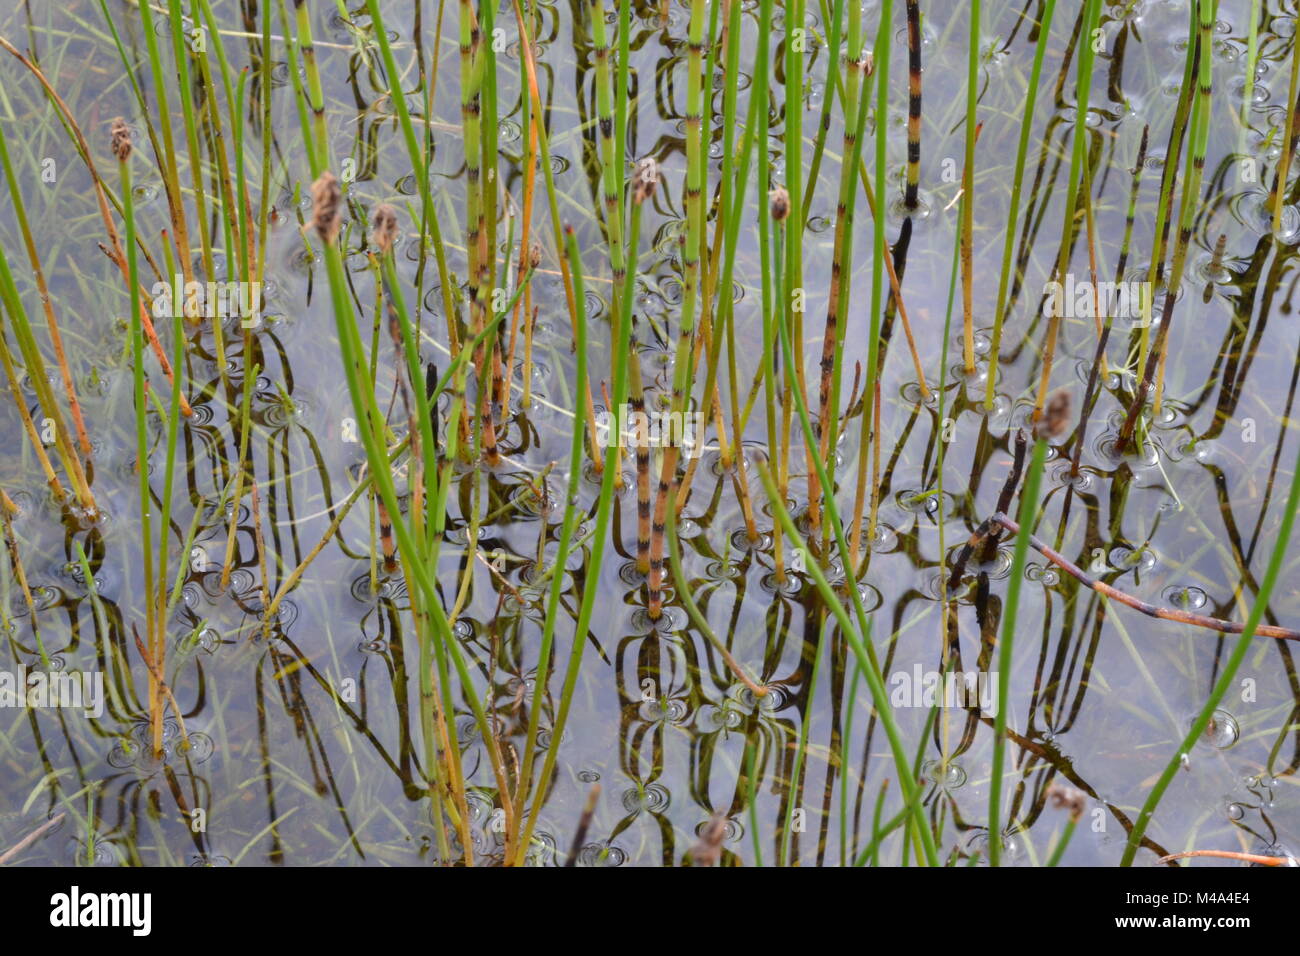 Equisetum reflections in water Stock Photo